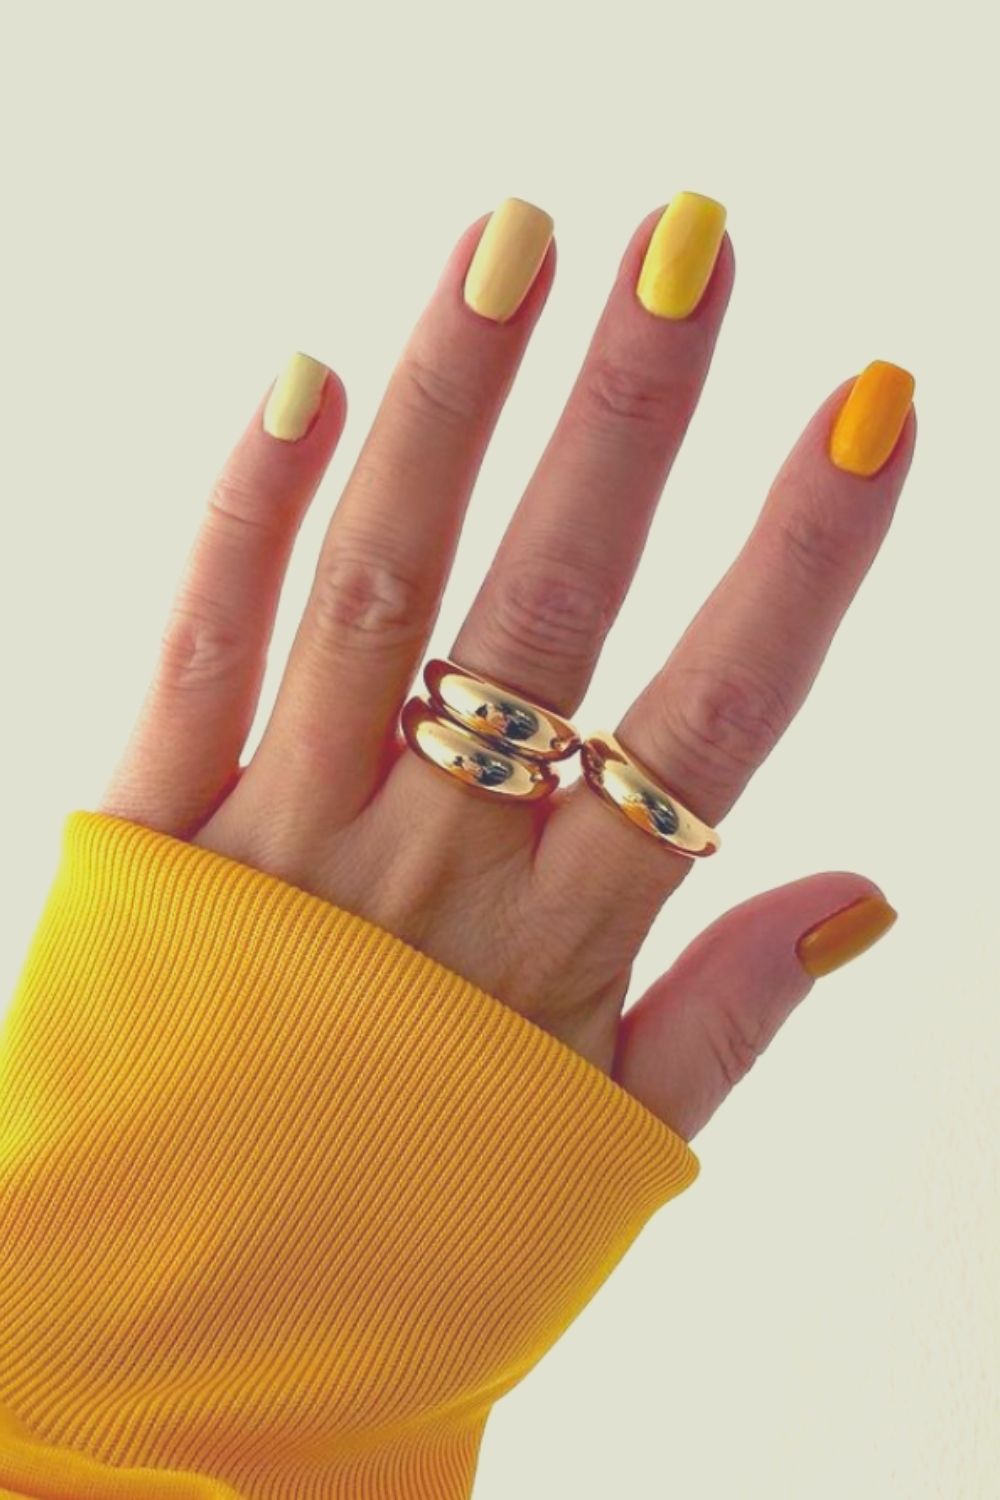 Cute summer nails to Try out in 2021